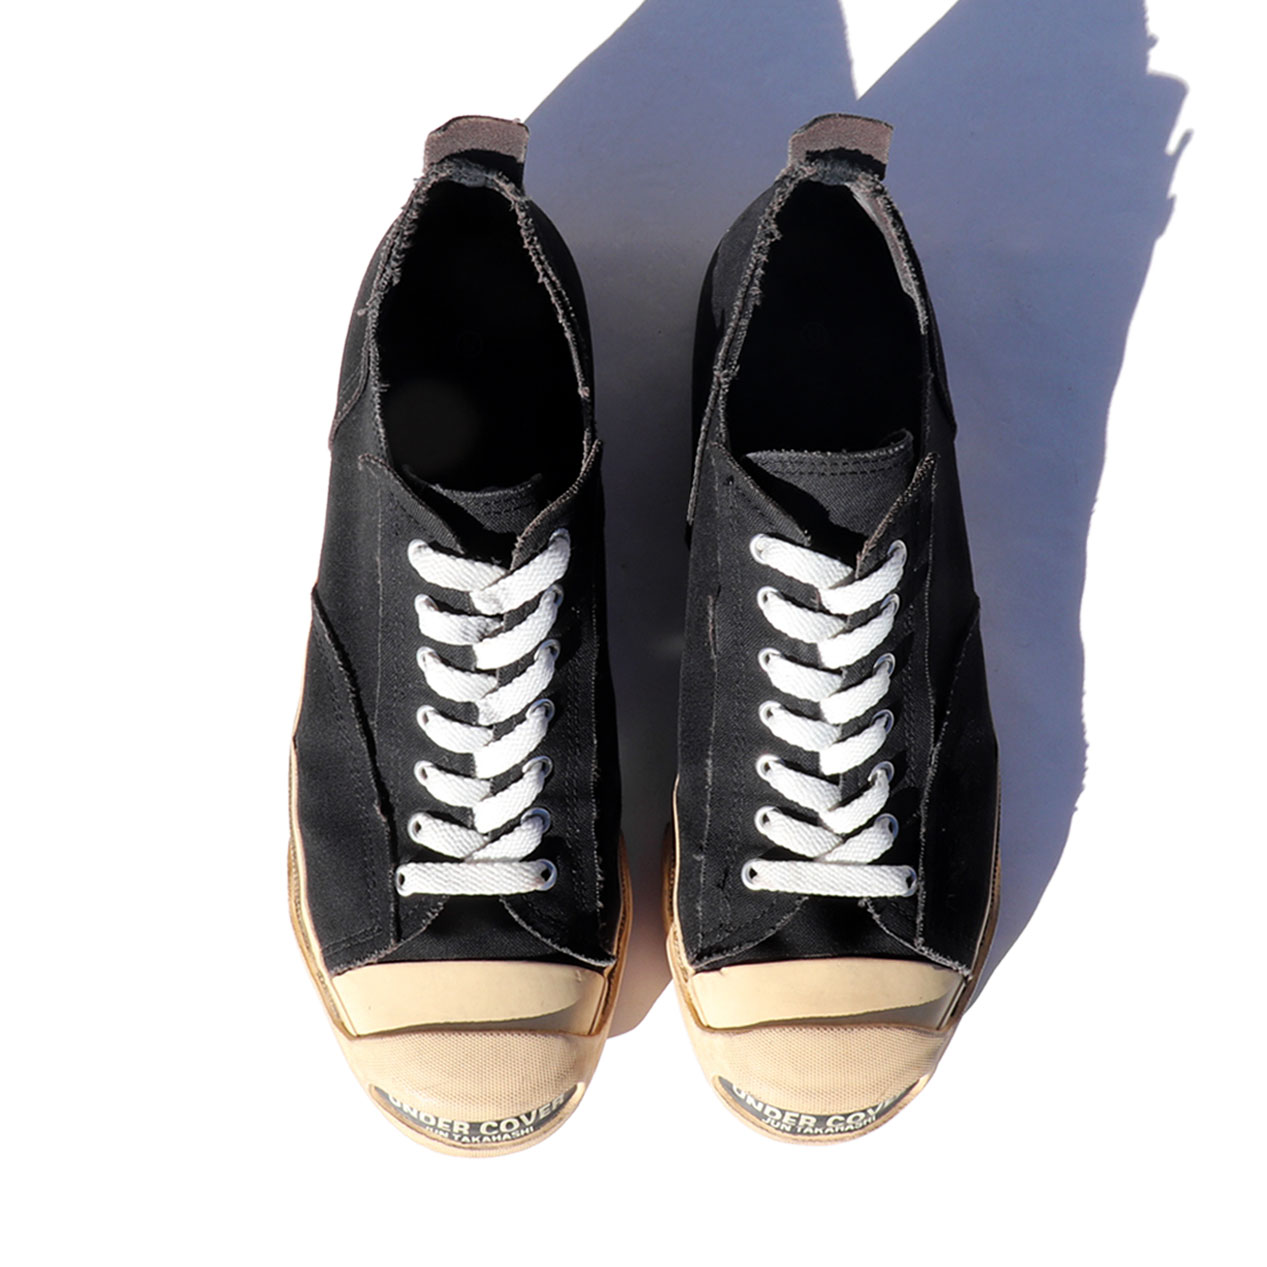 POST JUNK / '06 UNDERCOVER Jack Purcell Black Canvas [28cm]